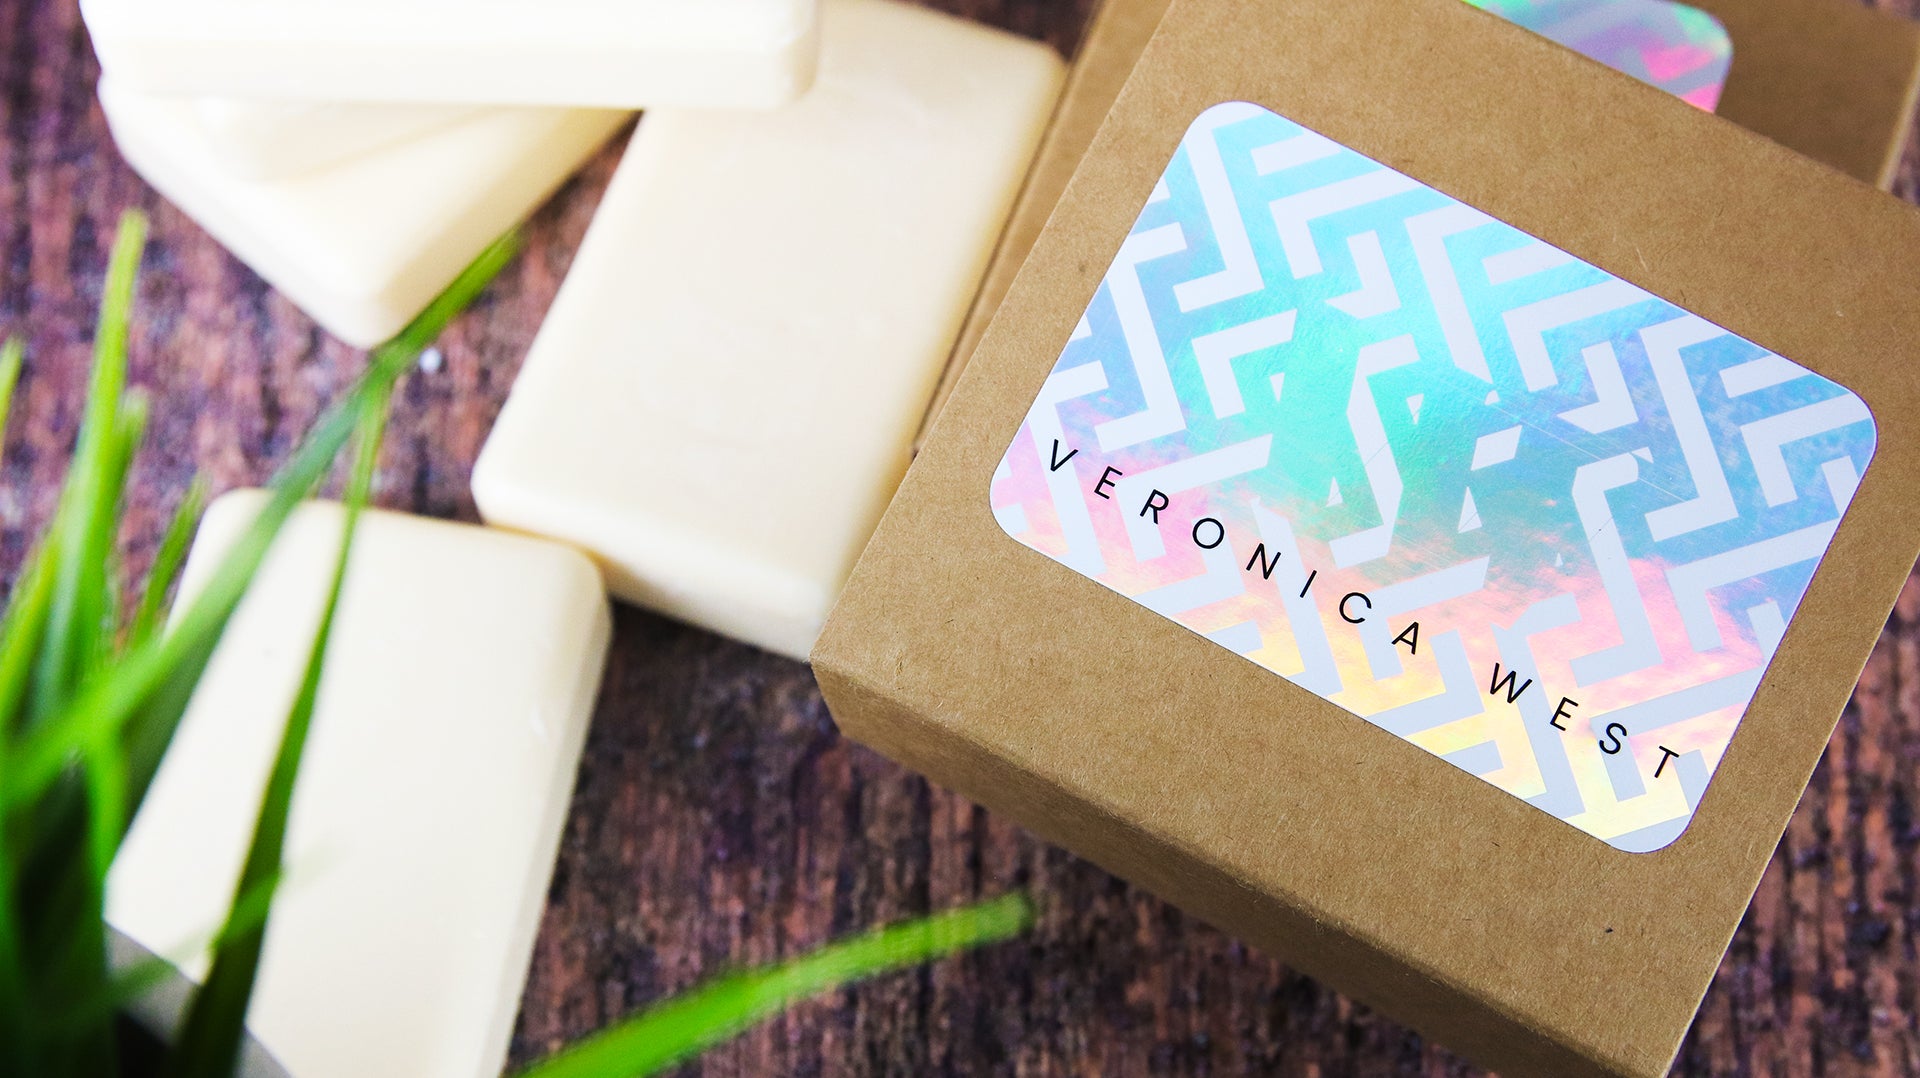 Rounded corner holographic company label with victoria west logo on cardboard soap boxes